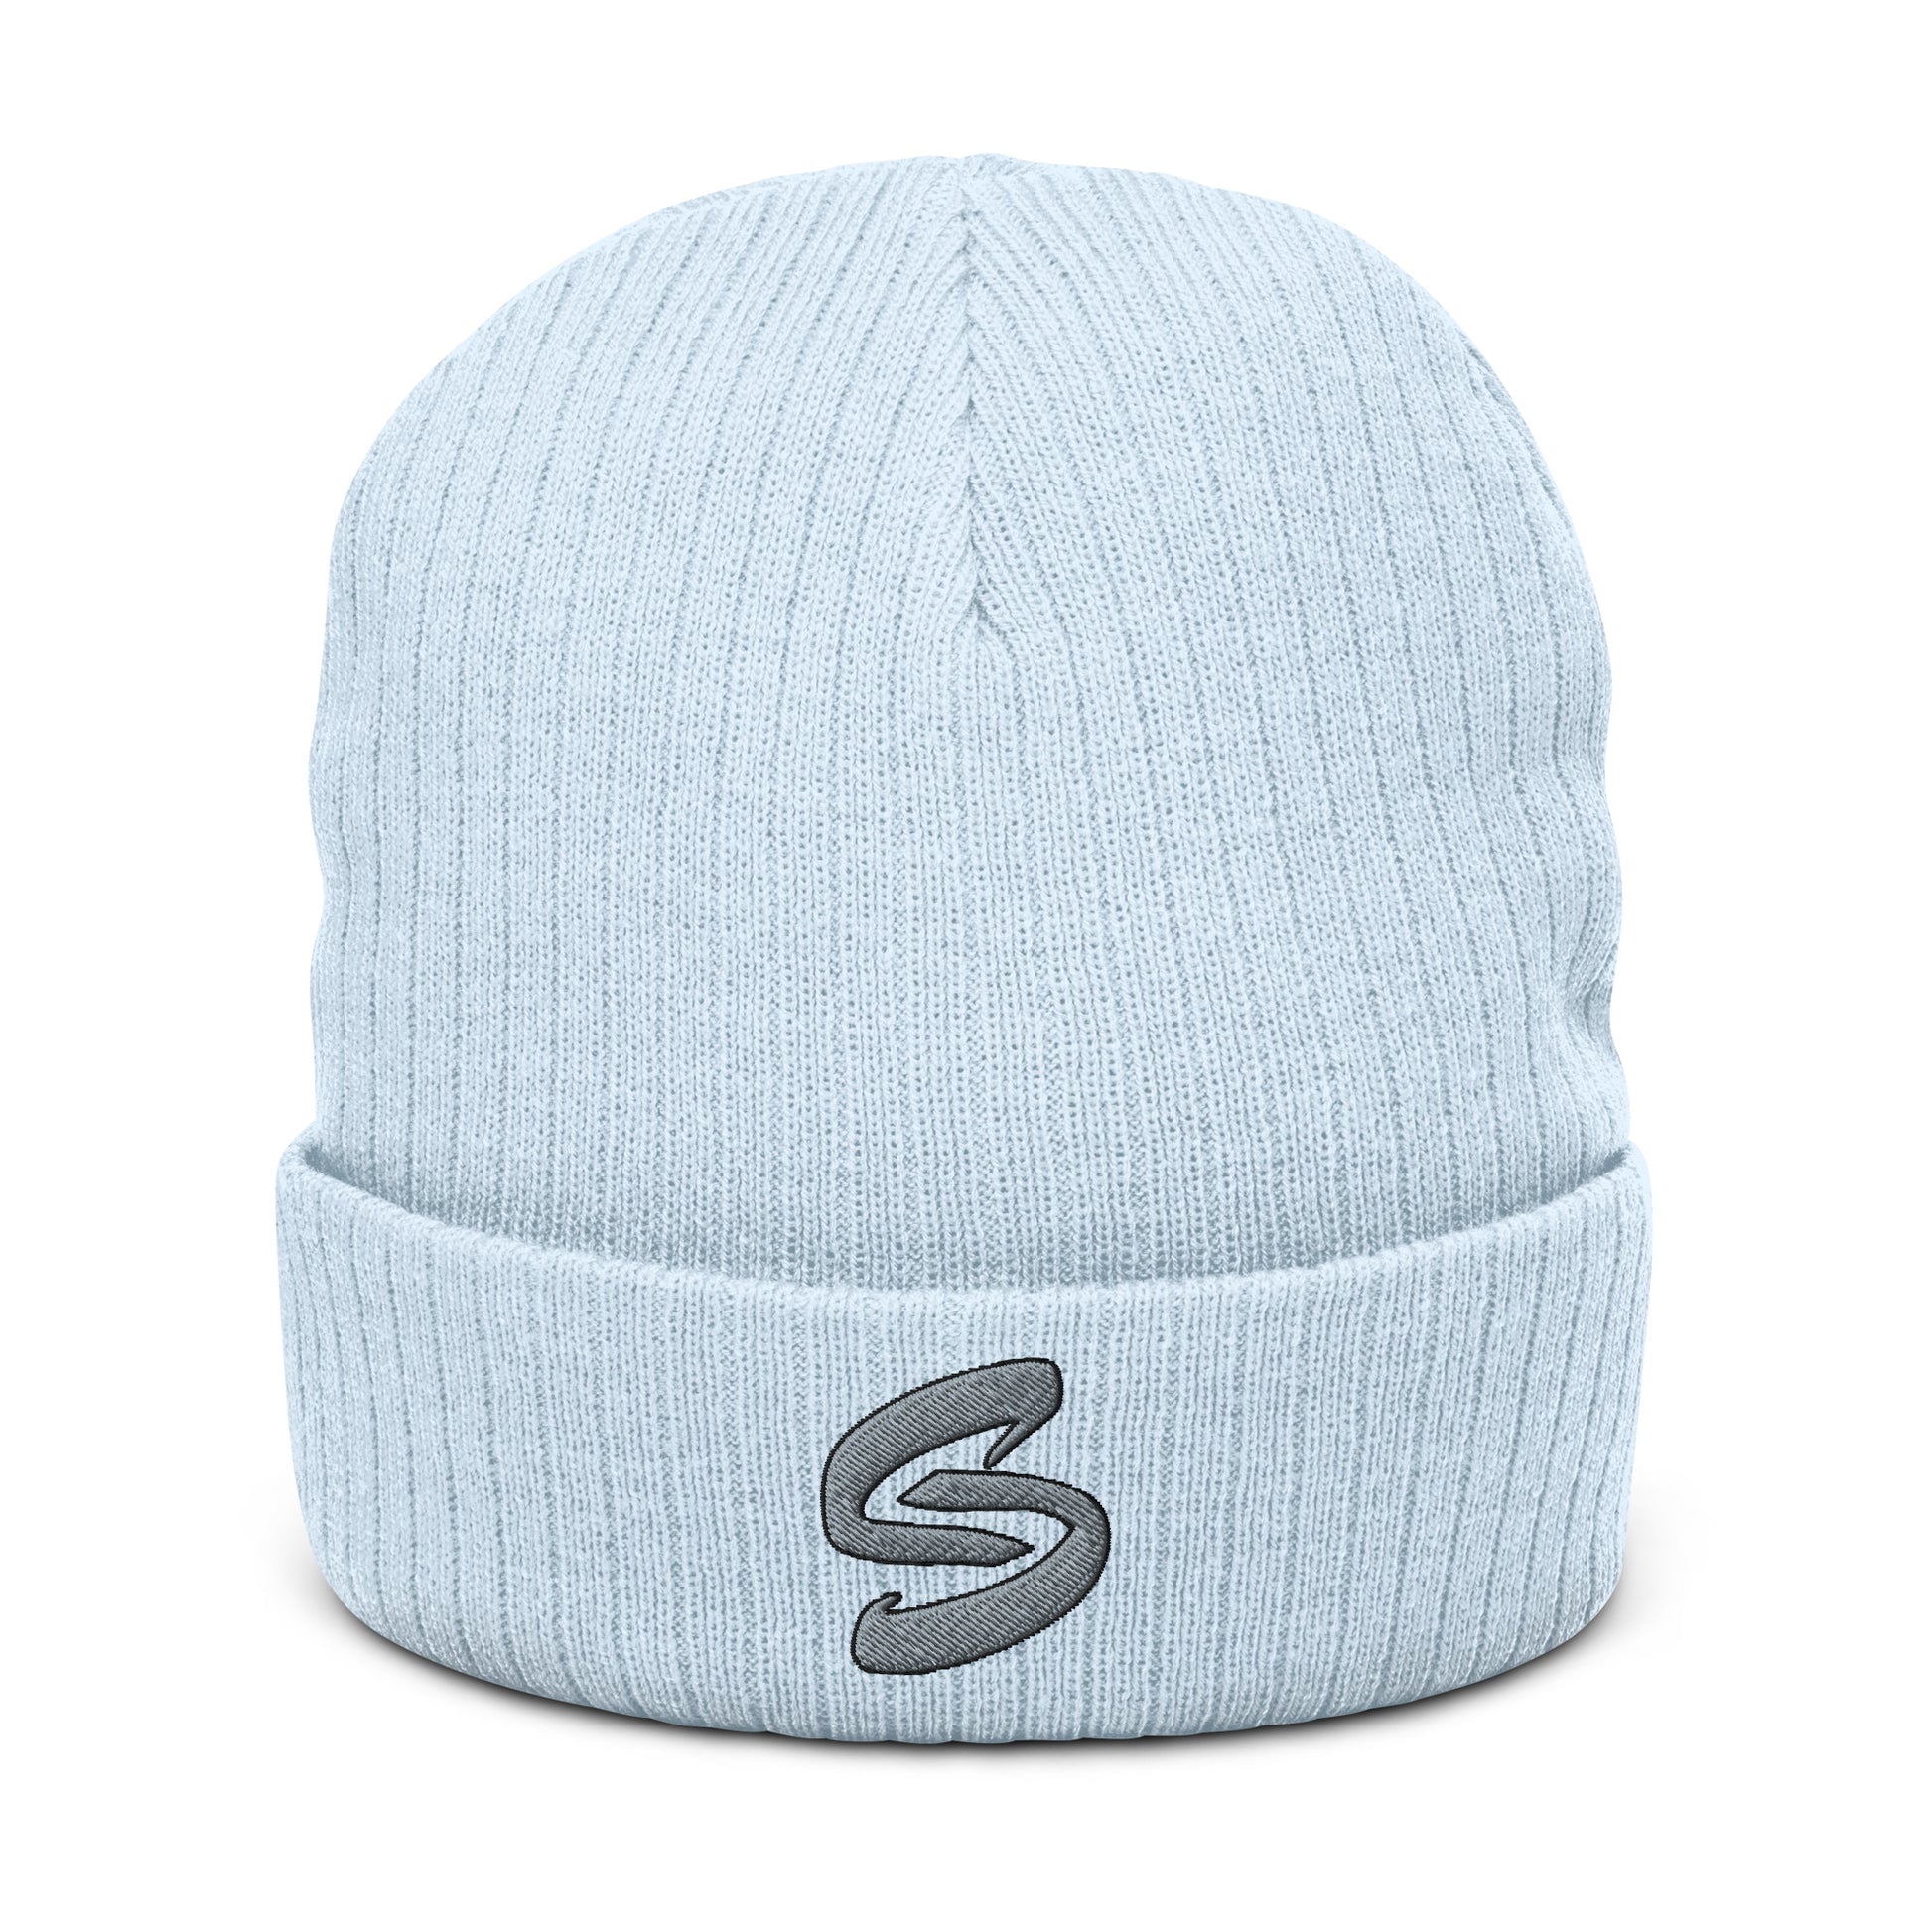 Ribbed knit beanie in recycled polyester and acrylic blend, double-layered with a cuffed design. Stylish, warm, and versatile accessory for all head sizes. Handcrafted on demand to reduce overproduction and promote sustainable choices. 8.27 inches (21 cm) in length. Beanie in Light Blue with embroidered Grey Send Coalition S logo